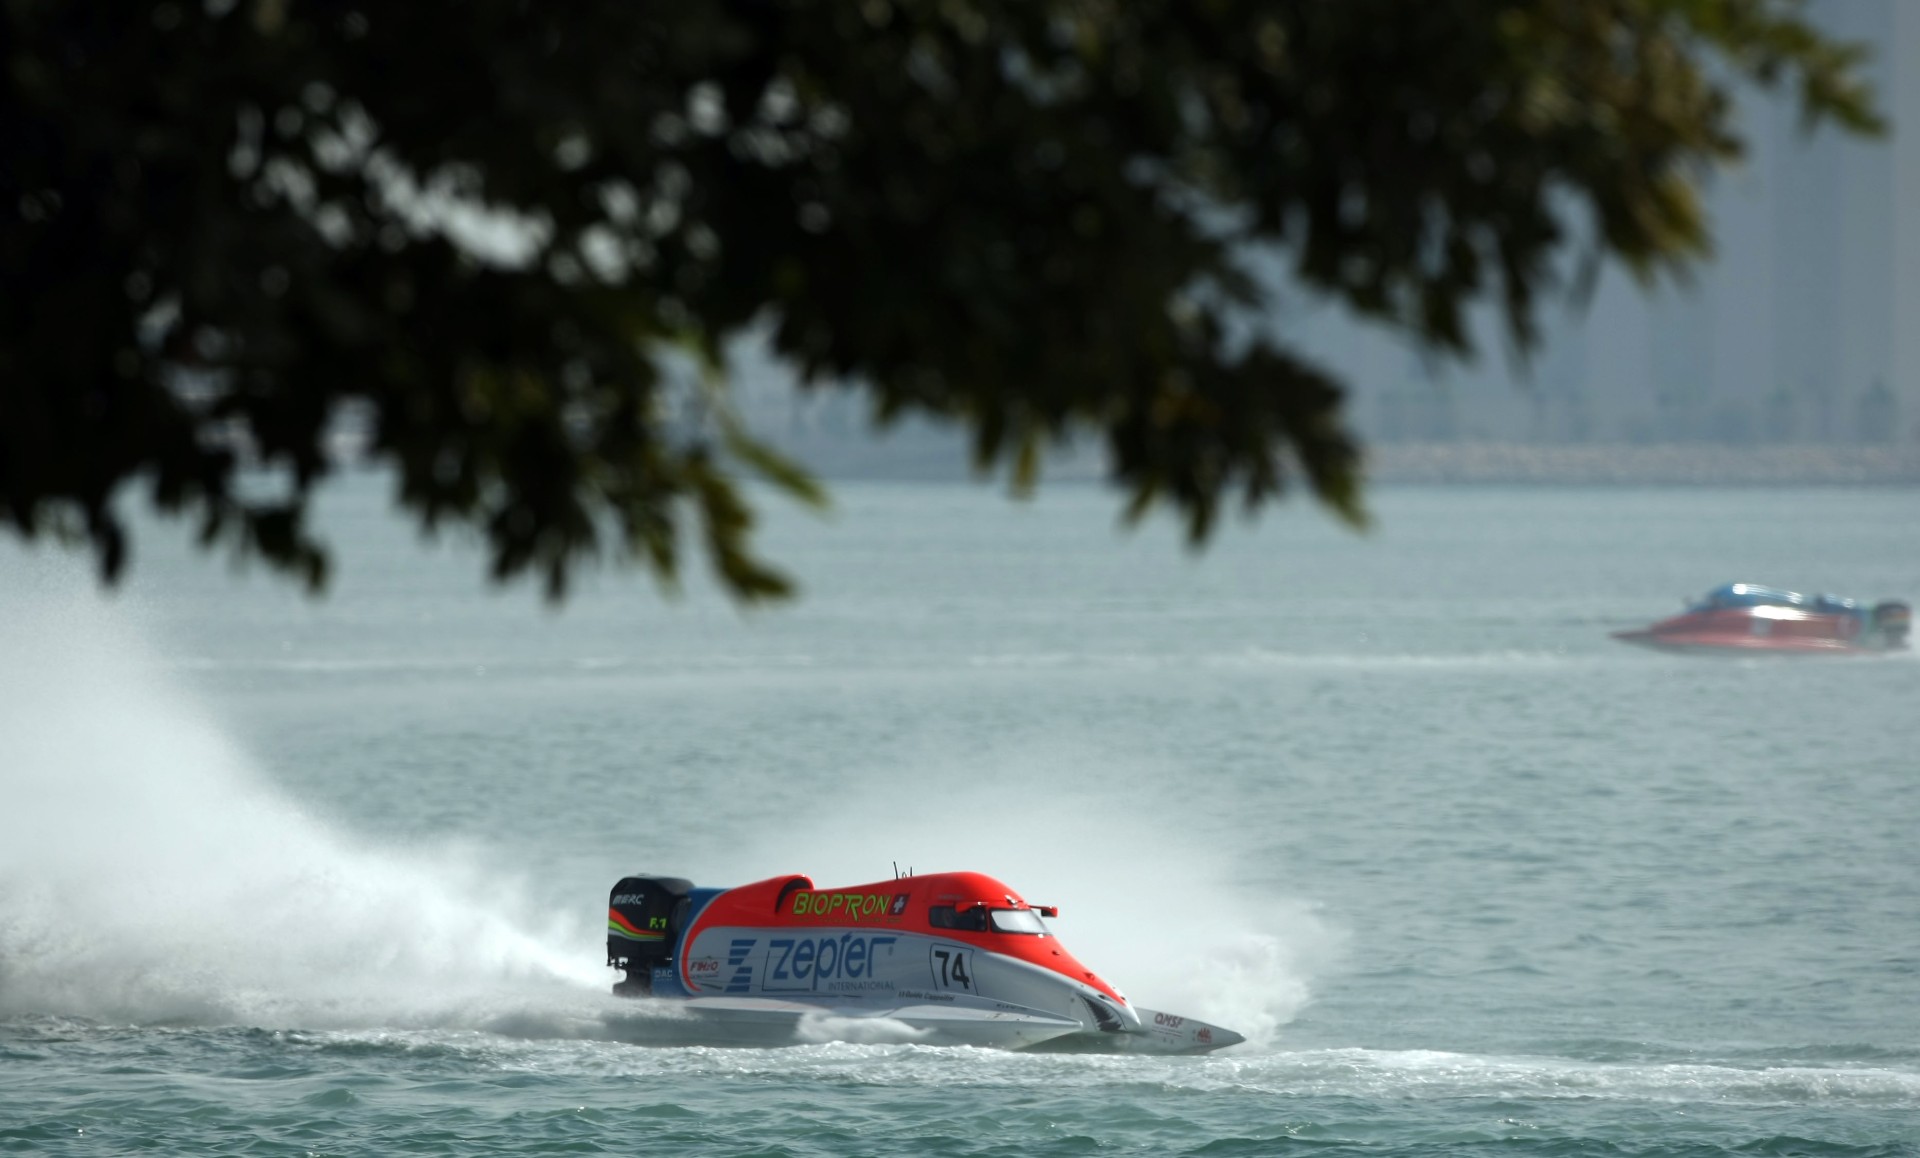 GP OF QATAR-271109-Guido Cappellini of Italy of the Zepter team in action in preparation for the UIM F1 Powerboat Grand Prix of Qatar, on the Doha Corniche, Doha, Qatar, the race days are November 27-28, 2009. Picture by Paul Lakatos/Idea Marketing.